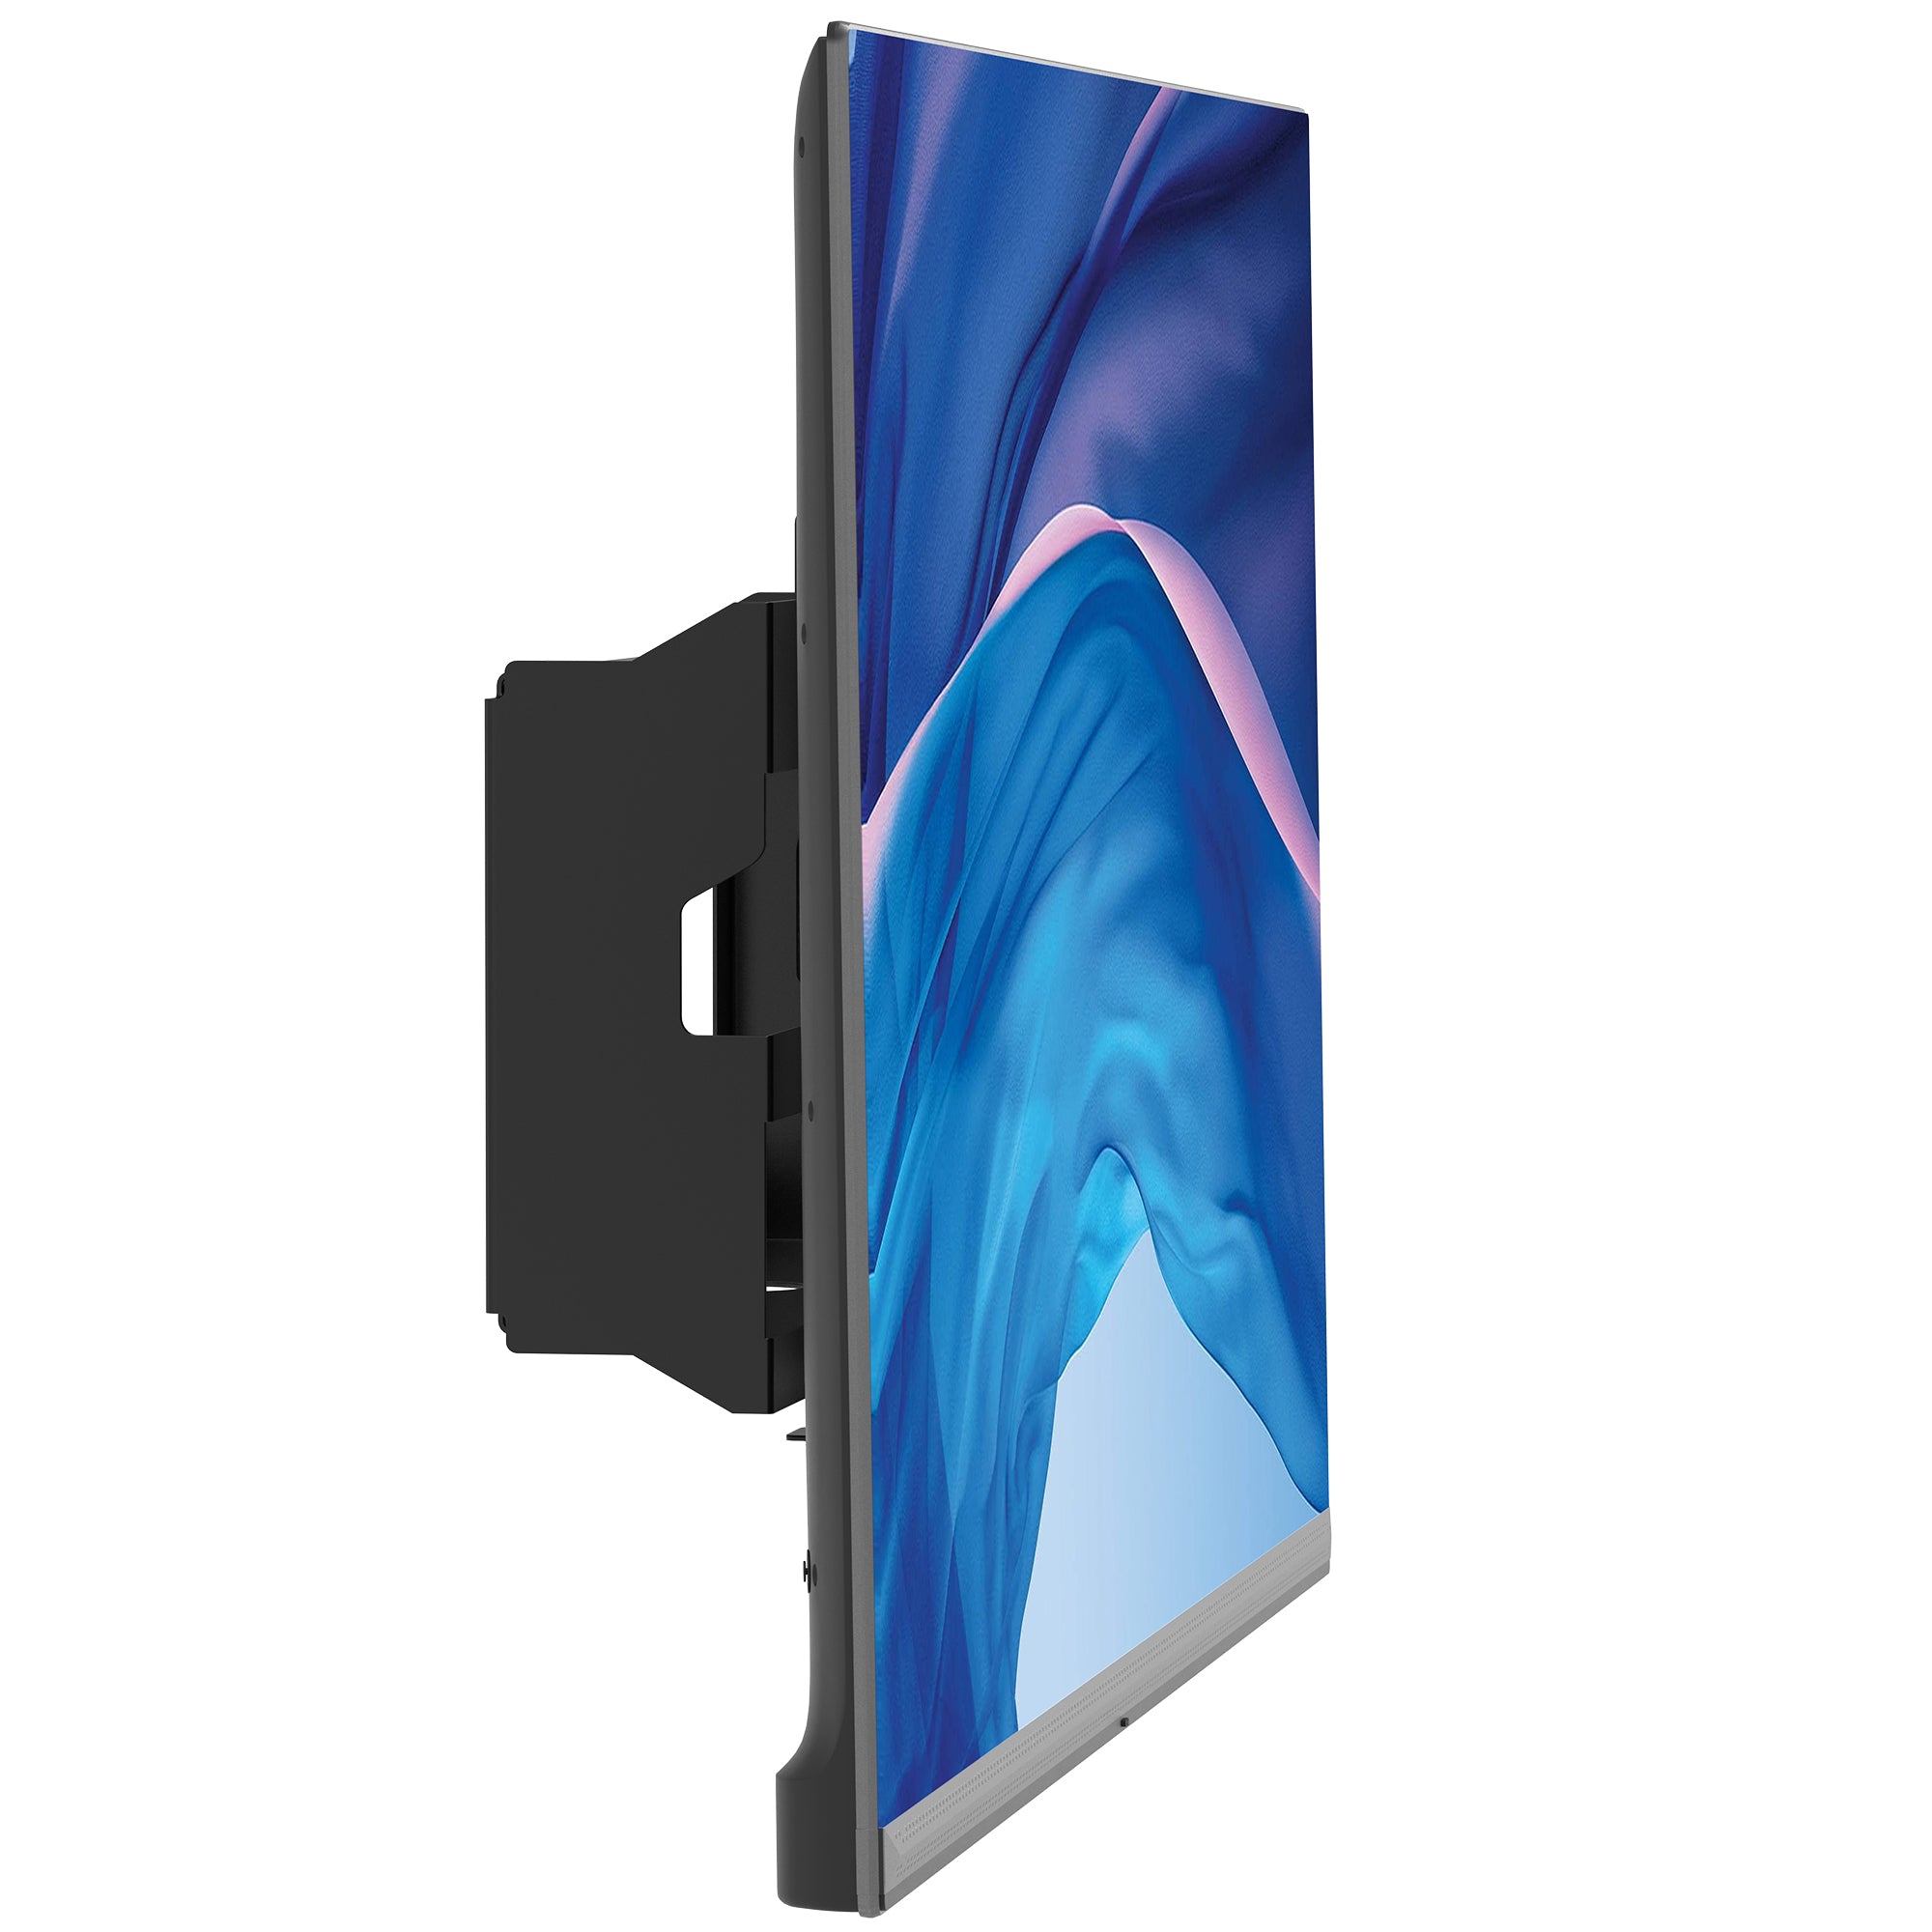 TV and Monitor Wall Mount with Storage Compartment for 14"- 42" Displays